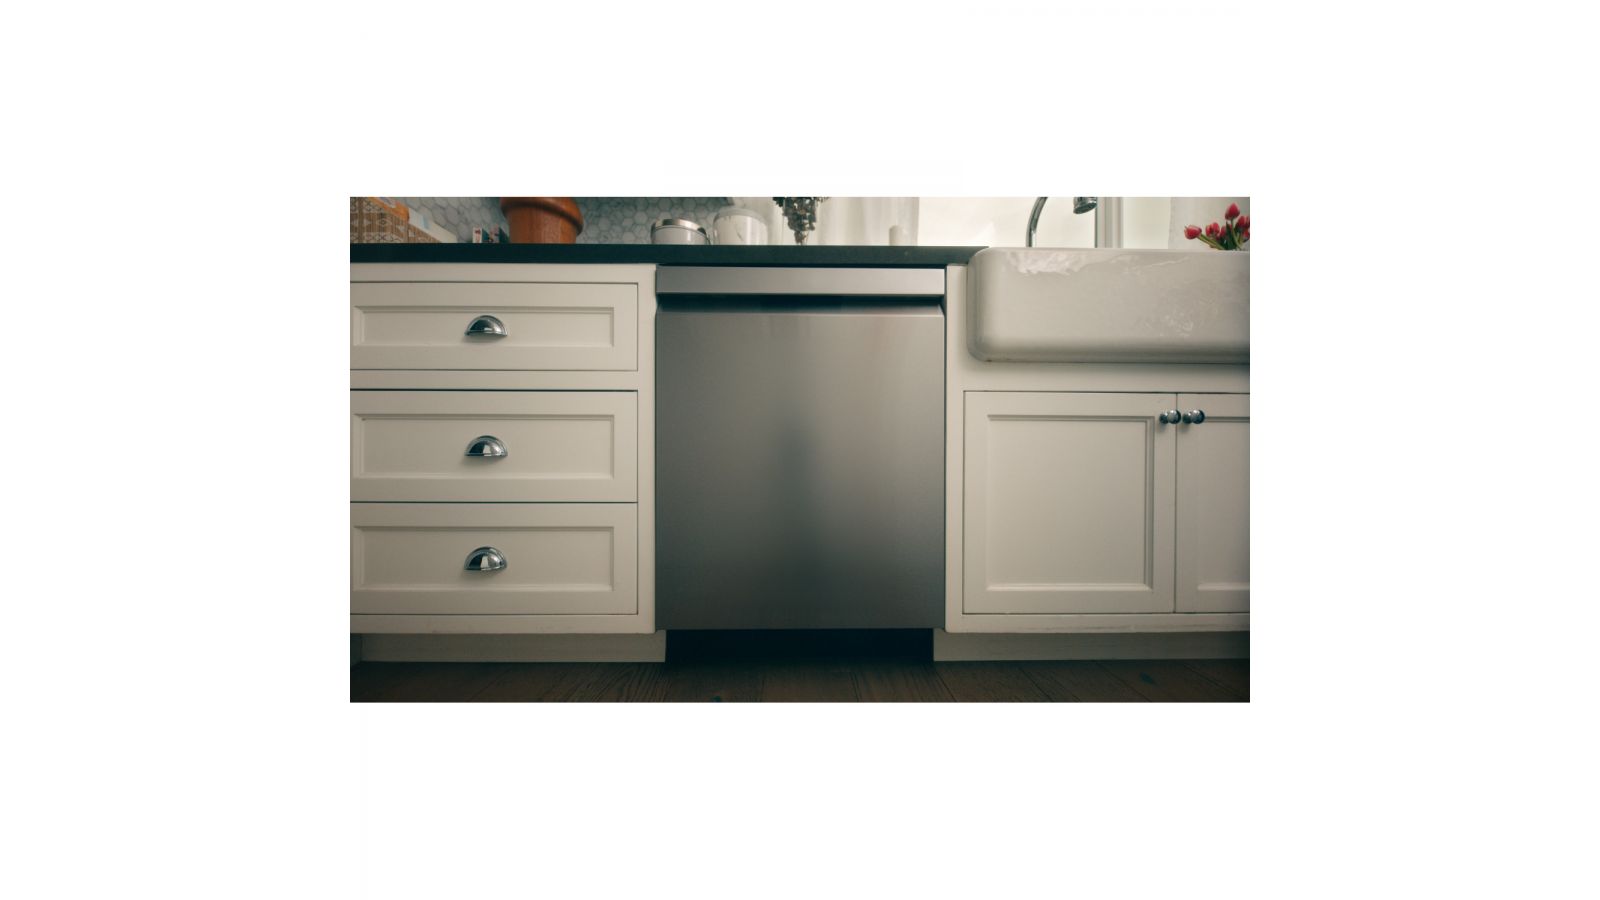 Smart Top Control Dishwasher with 1-Hour Wash & Dry, QuadWash Pro™, TrueSteam® and Dynamic Heat Dry™